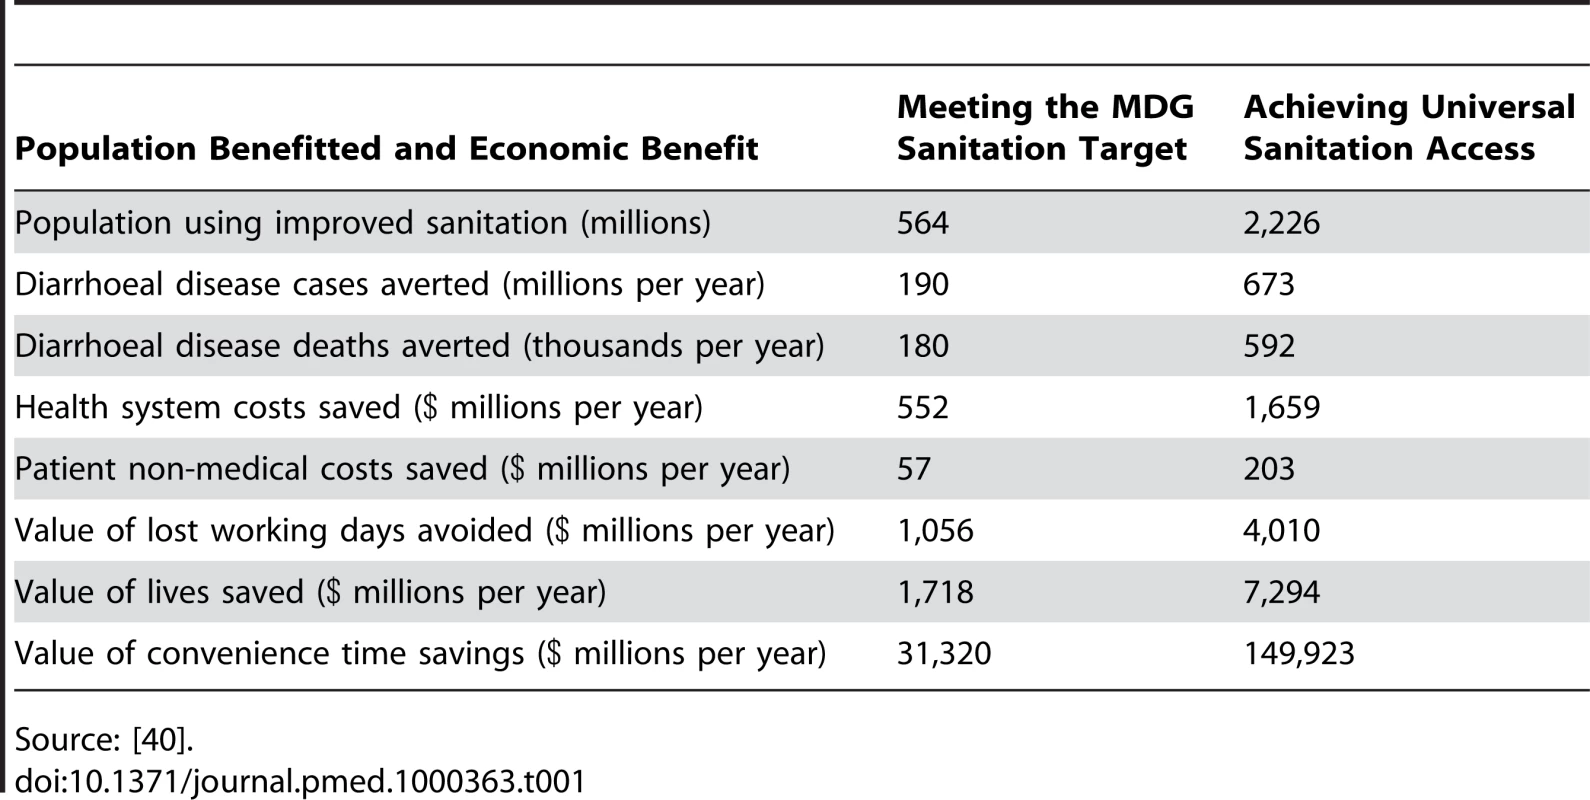 Economic benefits resulting from meeting the MDG sanitation target and from achieving universal sanitation access.